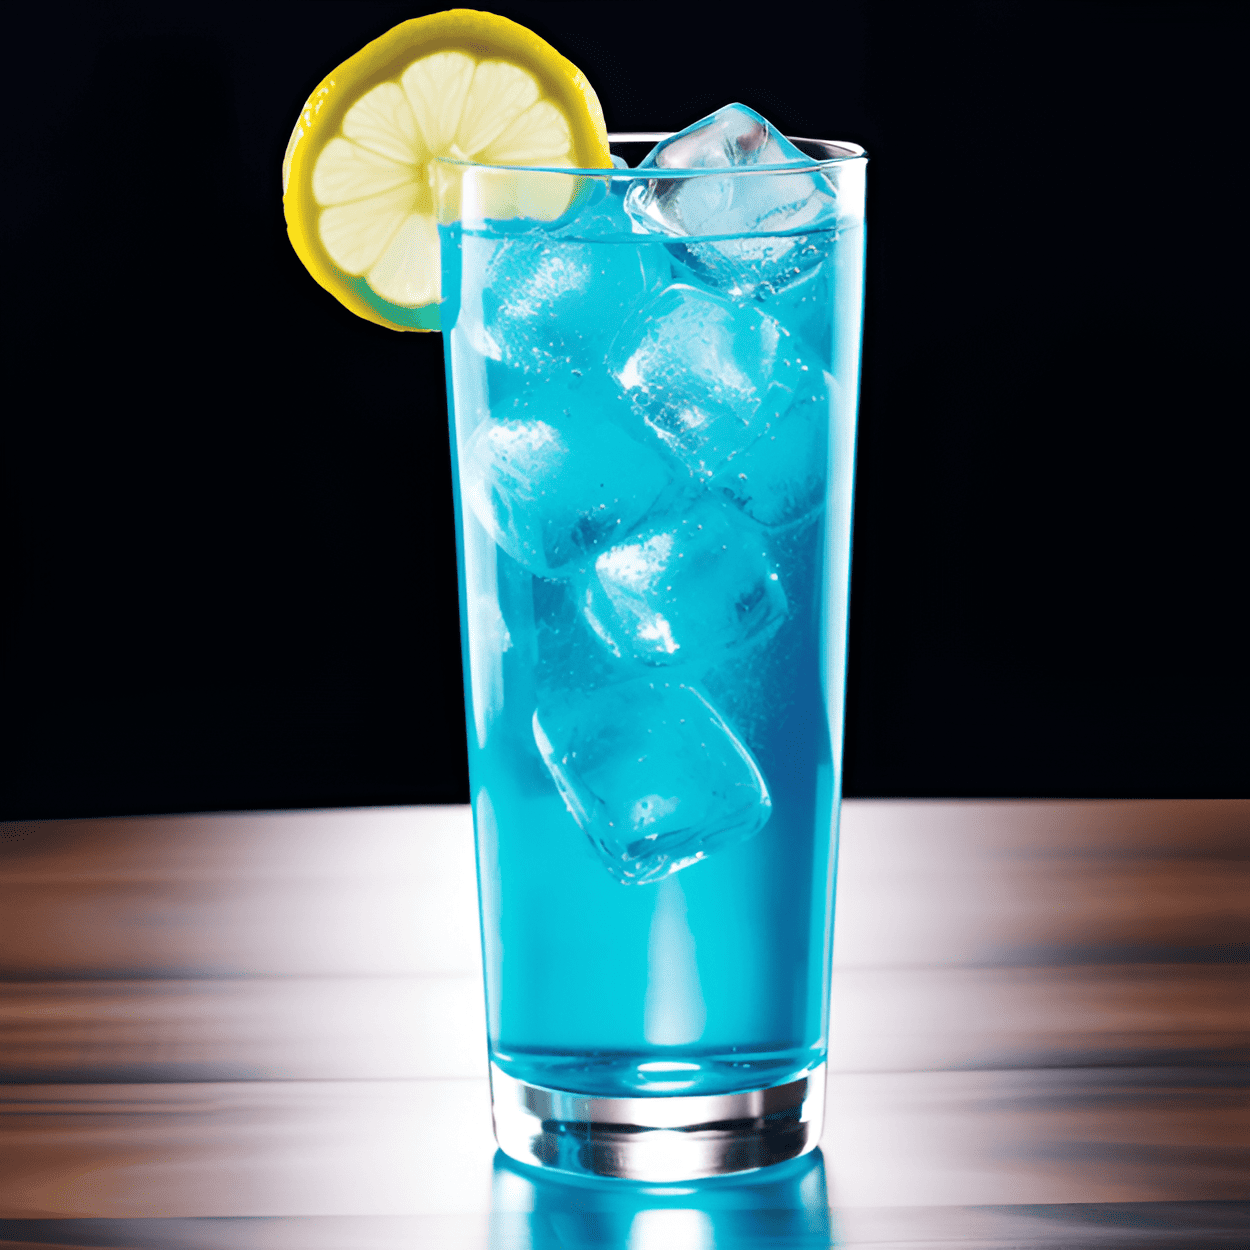 Sex On The Driveway Cocktail Recipe - The Sex On The Driveway is a sweet, fruity cocktail with a refreshing, tangy kick. The combination of peach schnapps and blue curaçao gives it a unique, tropical flavor, while the sprite adds a bubbly, citrusy note. The vodka provides a strong, smooth base that balances out the sweetness.